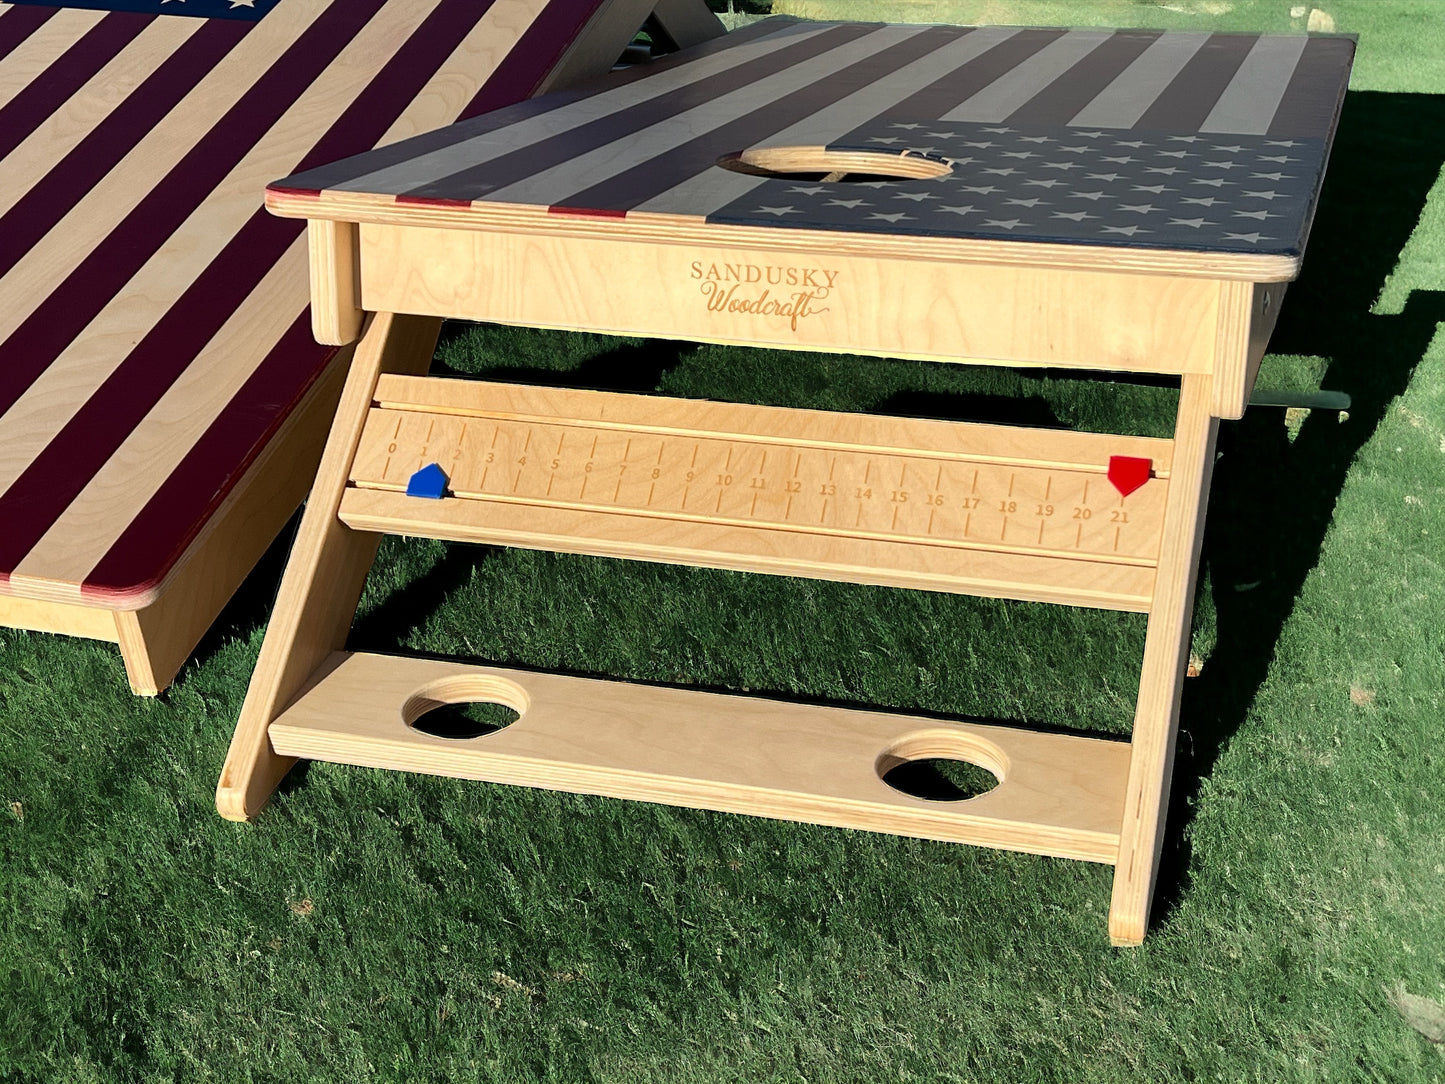 Cornhole Boards |  Red, White and Blue American Flag Set | Custom Made with Cupholder and Scoreboard